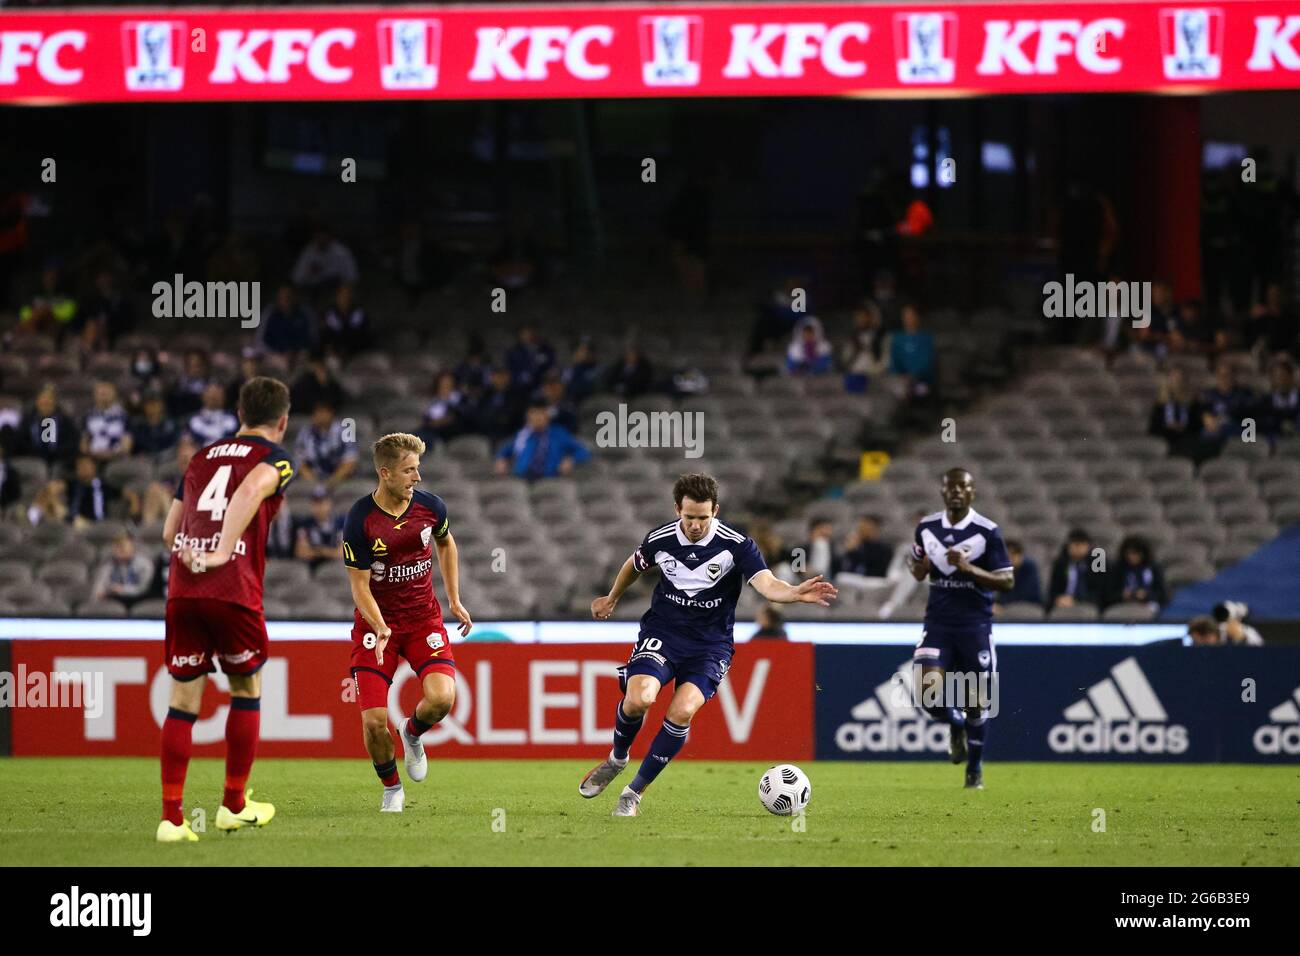 MELBOURNE, AUSTRALIA - MARCH 13: Matt Acton of Melbourne Victory controls the ball during the Hyundai A-League soccer match between Melbourne Victory and Adelaide United on March 13, 2021 at Marvel Stadium in Melbourne, Australia. (Photo by Dave Hewison) Stock Photo